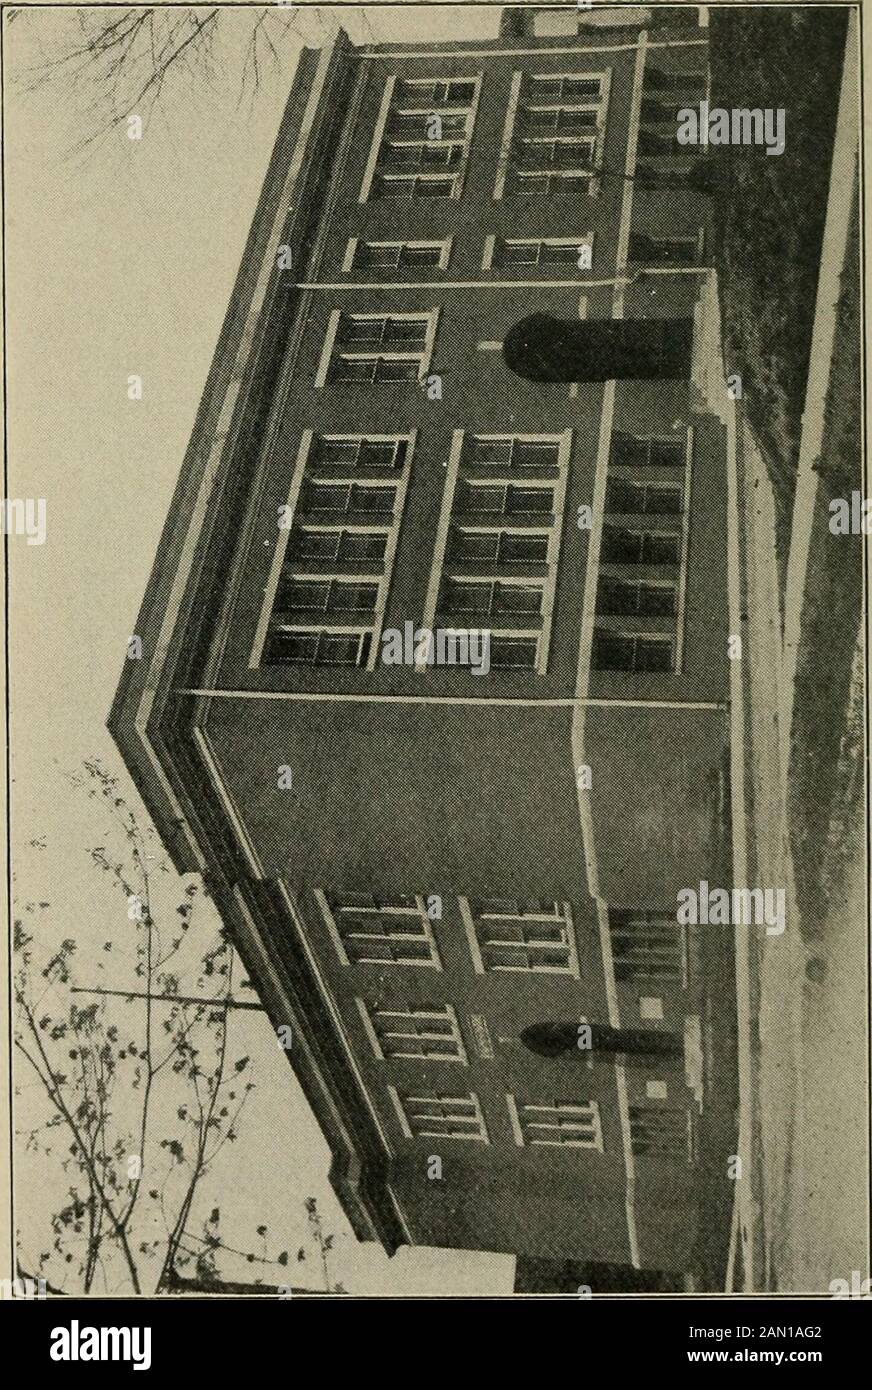 School architecture; a handy manual for the use of architects and school authorities . majority of highschools and many grammar schools contain an as-sembly hall. It is intended invariably to accom-modate all the pupils of the school at one sitting.The consensus of opinion now favors the groundfloor assembly hall. It can very conveniently beplaced between the two wings of an H-shapedbuilding or form the center section of a schoolbuilt in the shape of an E. The entrances to thegallery are from the second floor. Several advantages are gained by placing theassembly hall on the ground floor. Prima Stock Photo